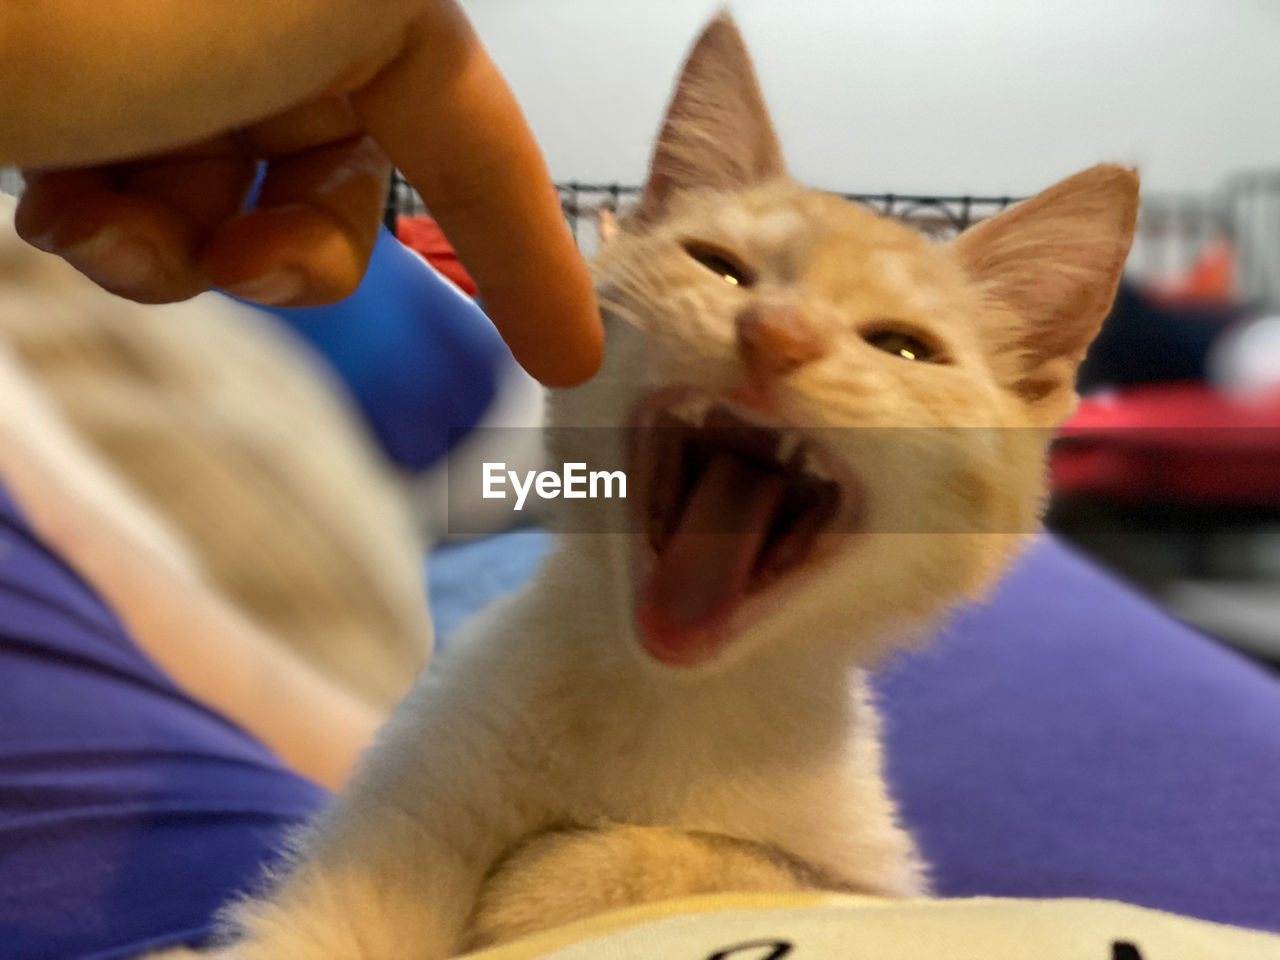 mammal, animal, animal themes, pet, cat, domestic animals, one animal, nose, domestic cat, indoors, feline, small to medium-sized cats, felidae, skin, adult, mouth open, whiskers, animal body part, one person, close-up, carnivore, focus on foreground, care, hand, facial expression, kitten, emotion